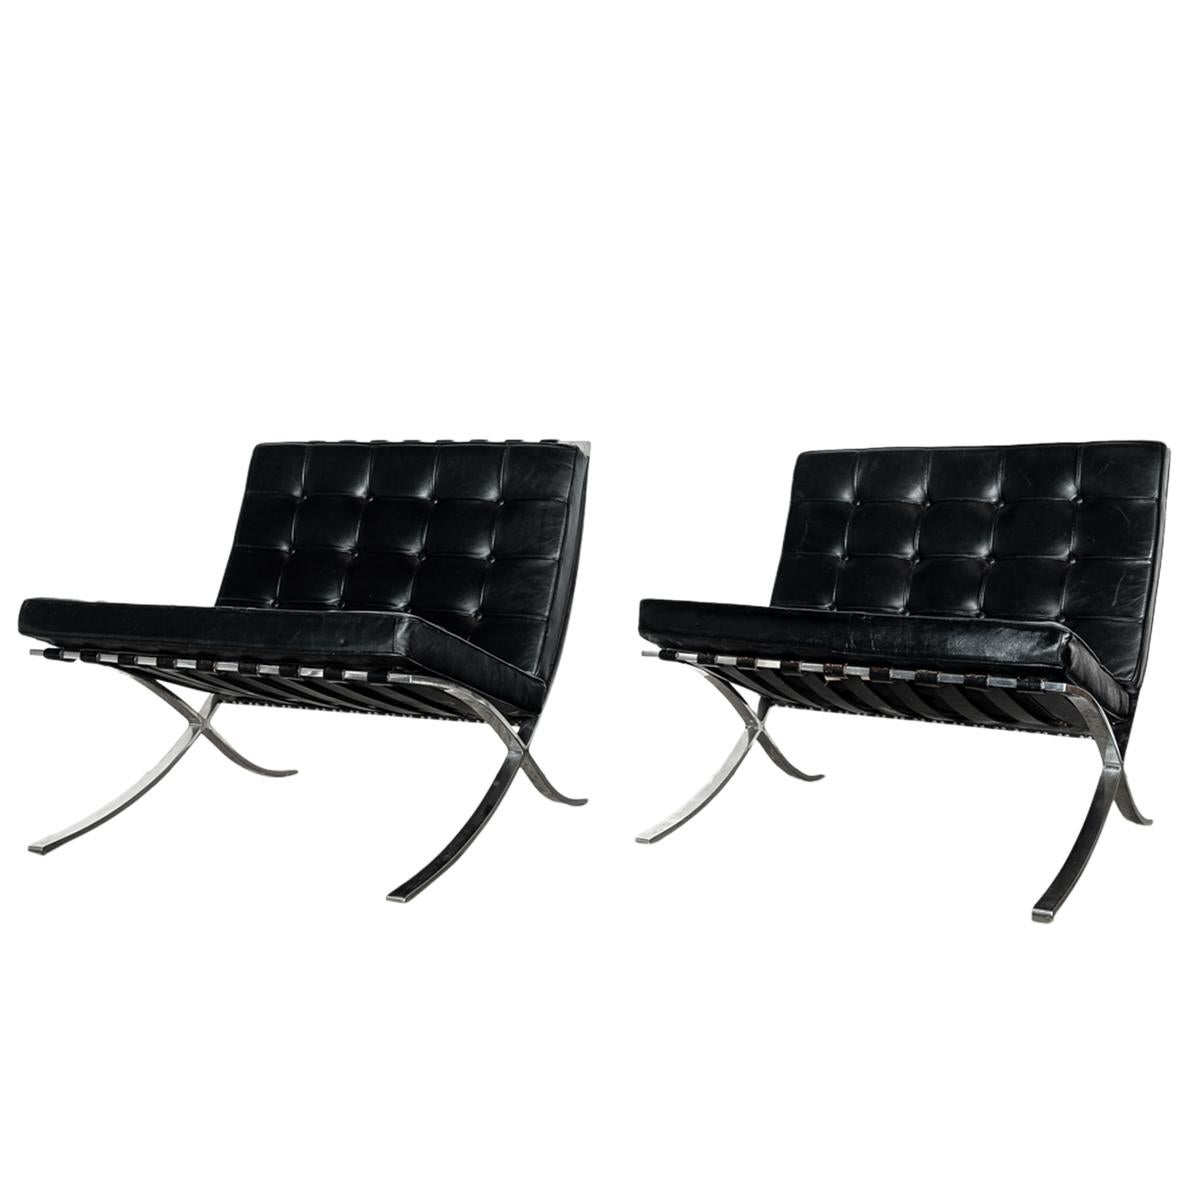 Steel Early Pair MCM Knoll Barcelona Chairs Black Leather Mies van der Rohe 1961 For Sale